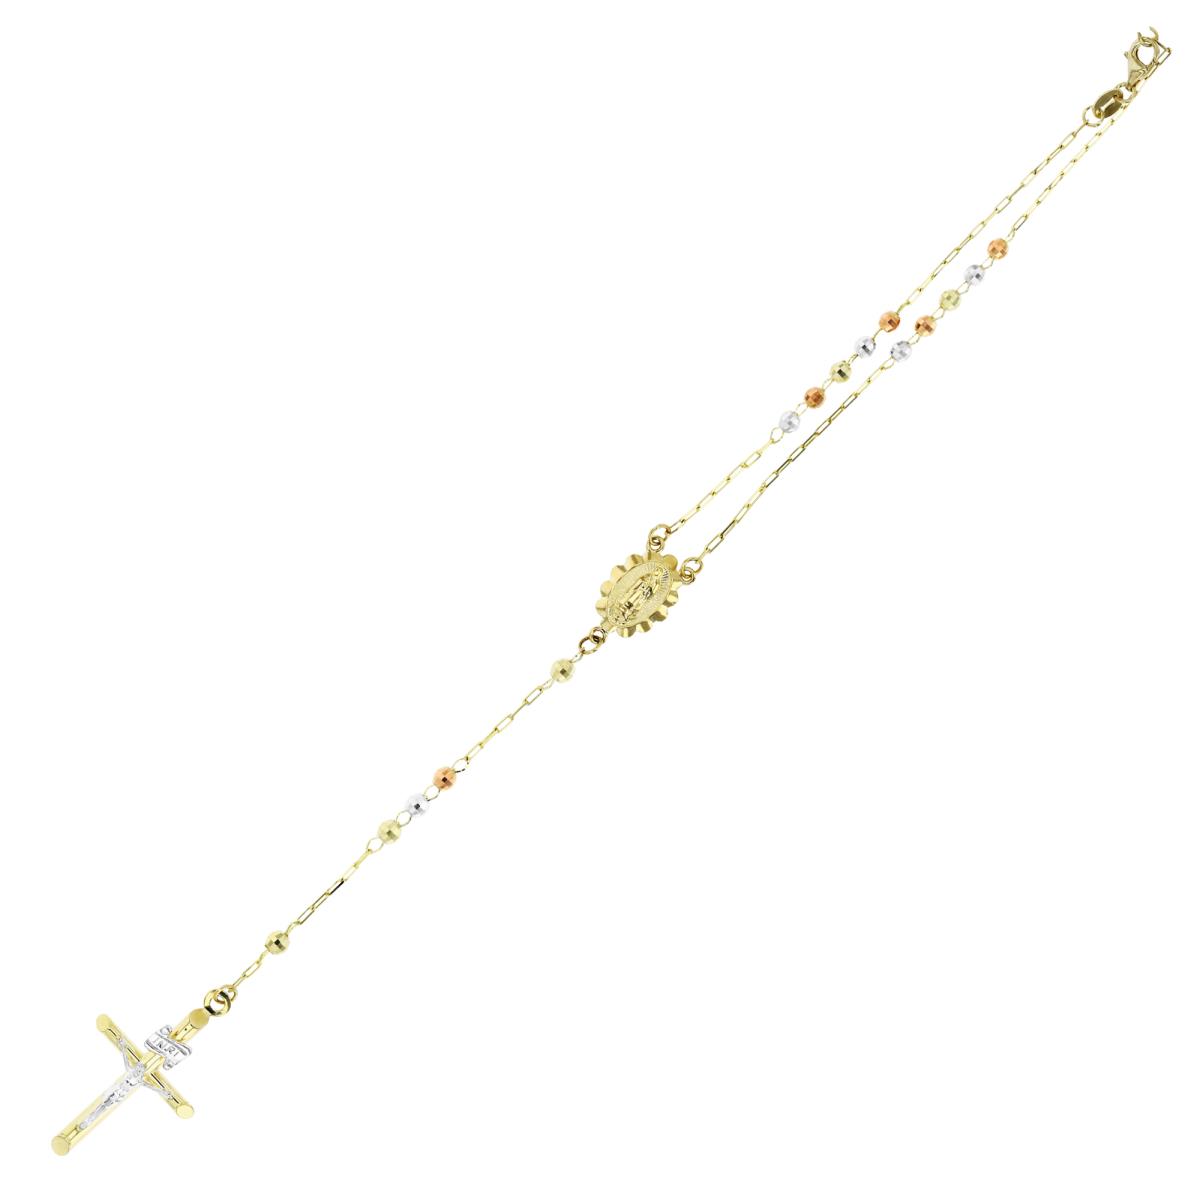 14K Gold Tricolor 3MM Diamond Cut Beads Rosary 18" Necklace